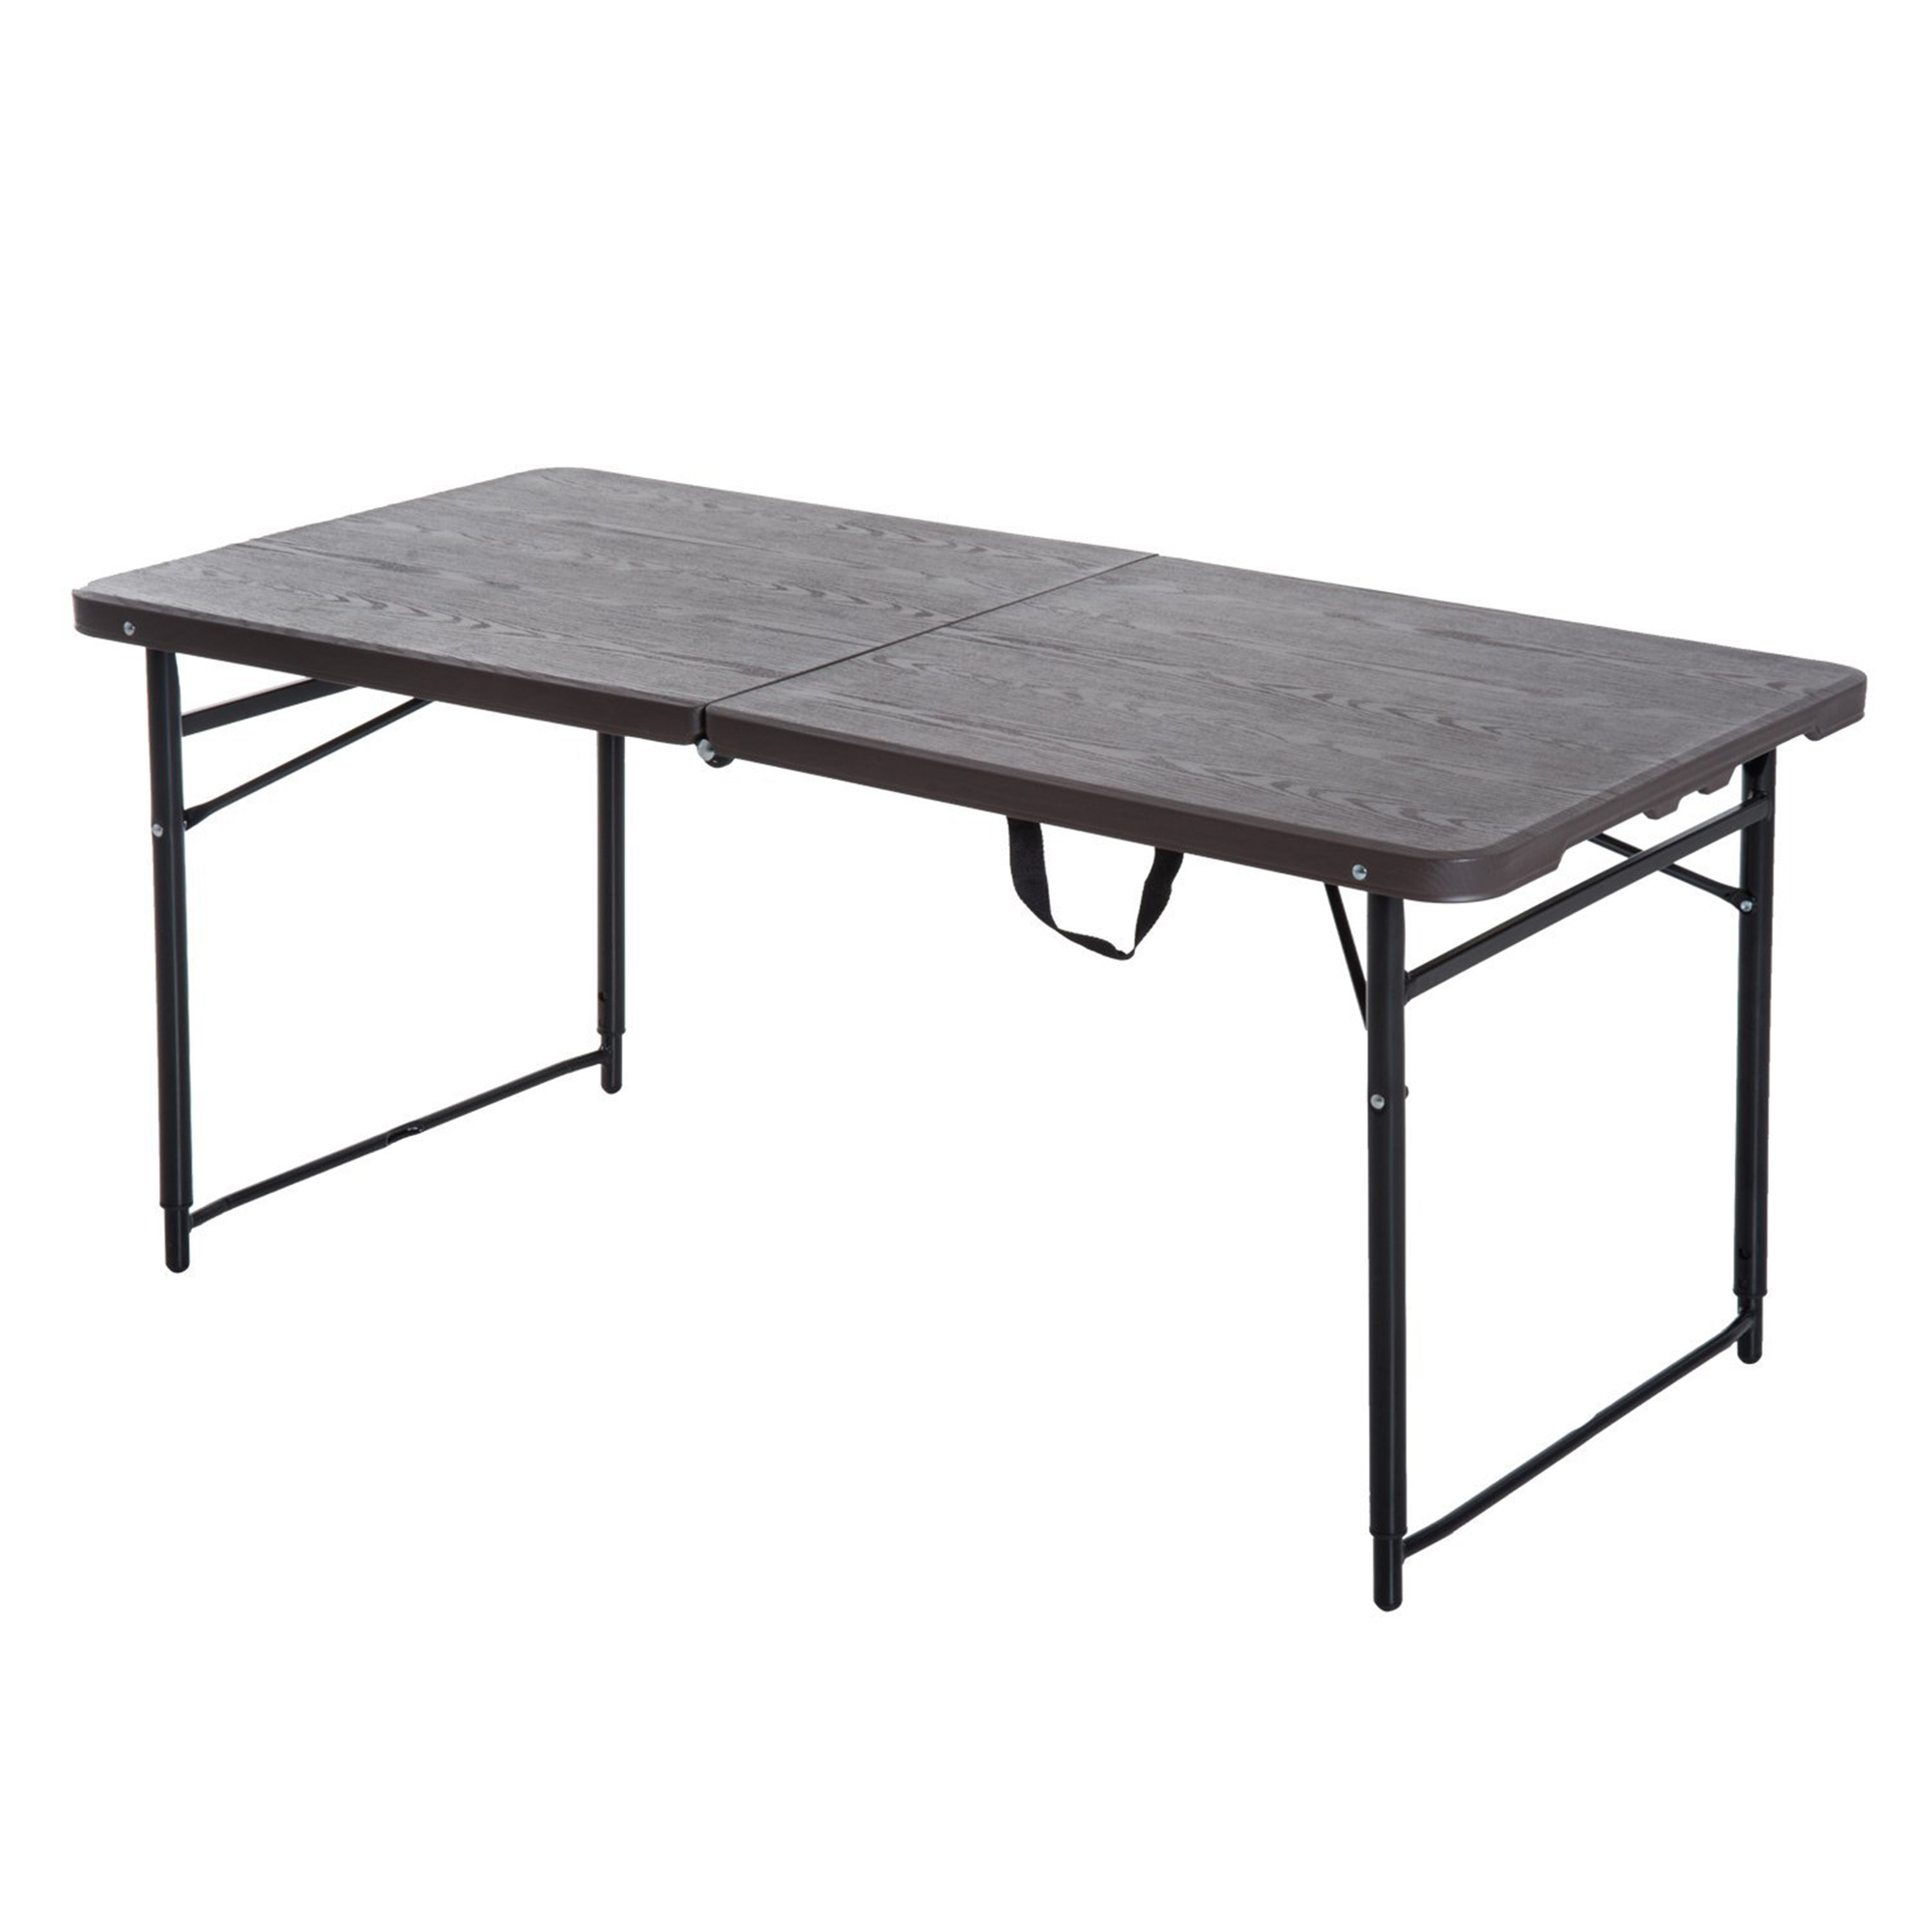 Outsunny Outdoor Folding Table with Sink and Faucet Organized